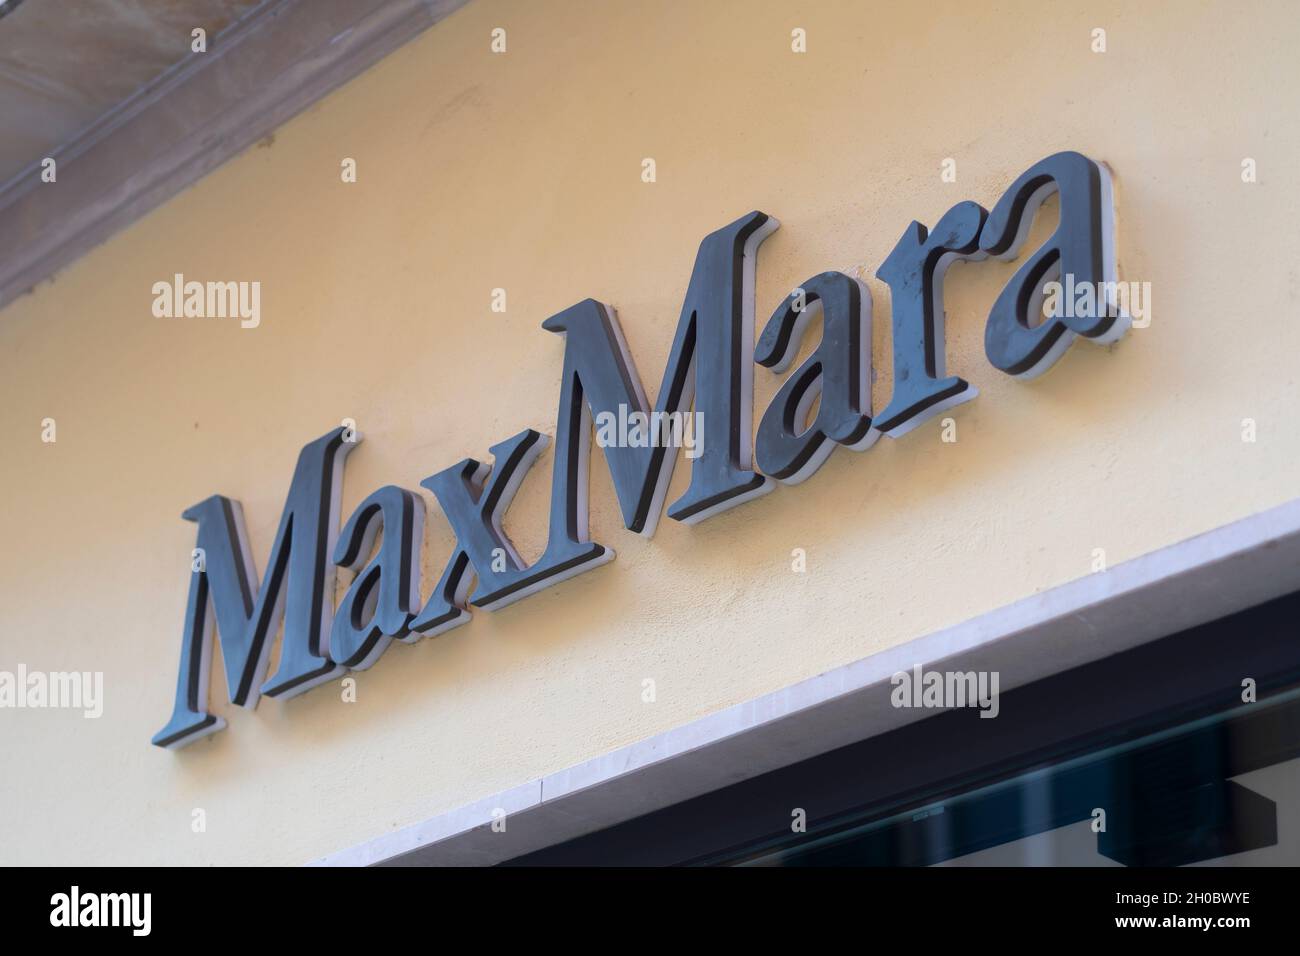 Max mara store hi-res stock photography and images - Alamy